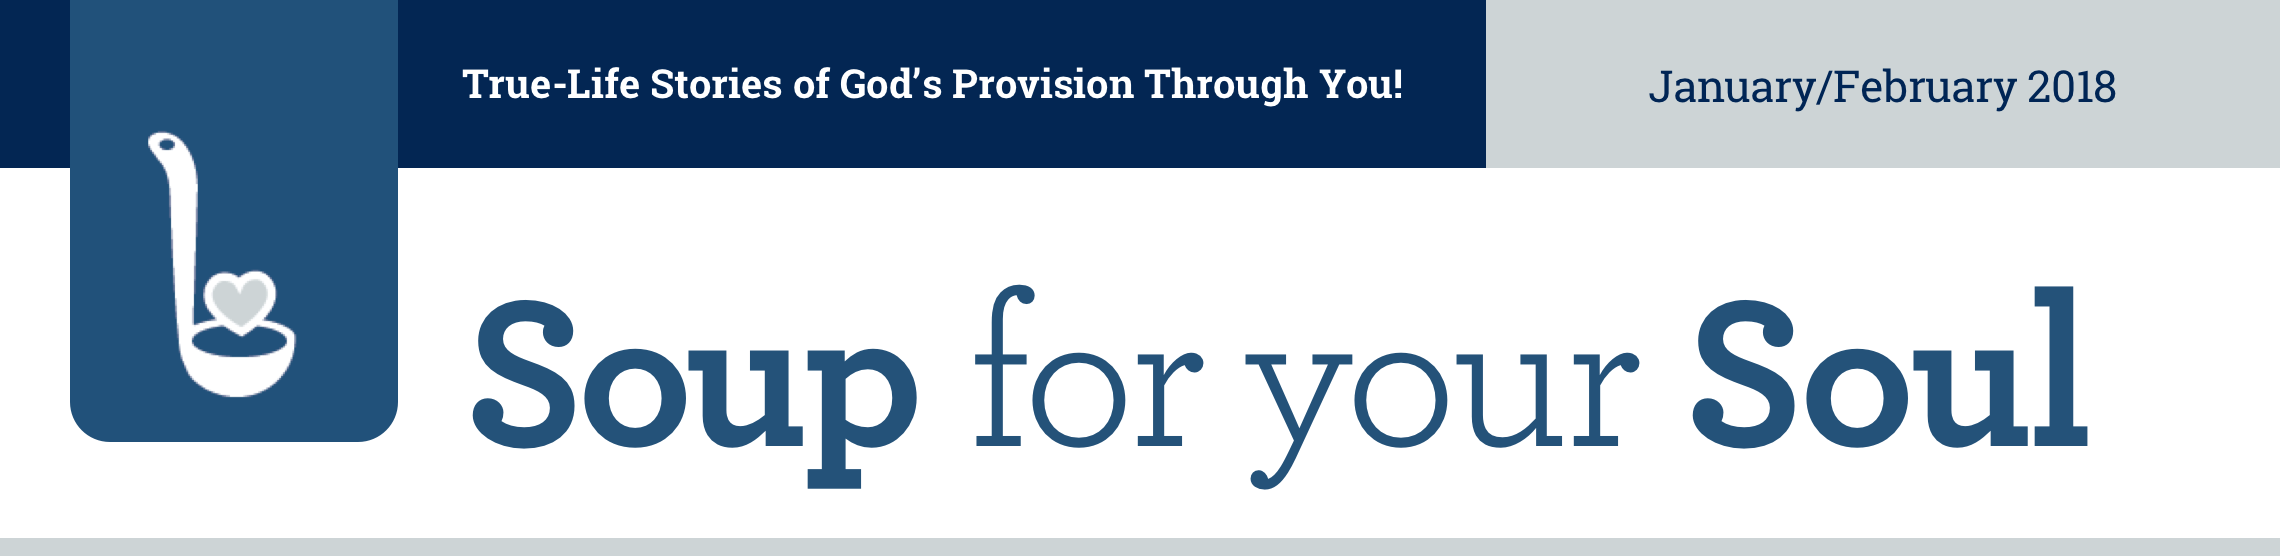 True-Life Stories of God’s Provision Through You! November/December 2017. Soup for your Soul